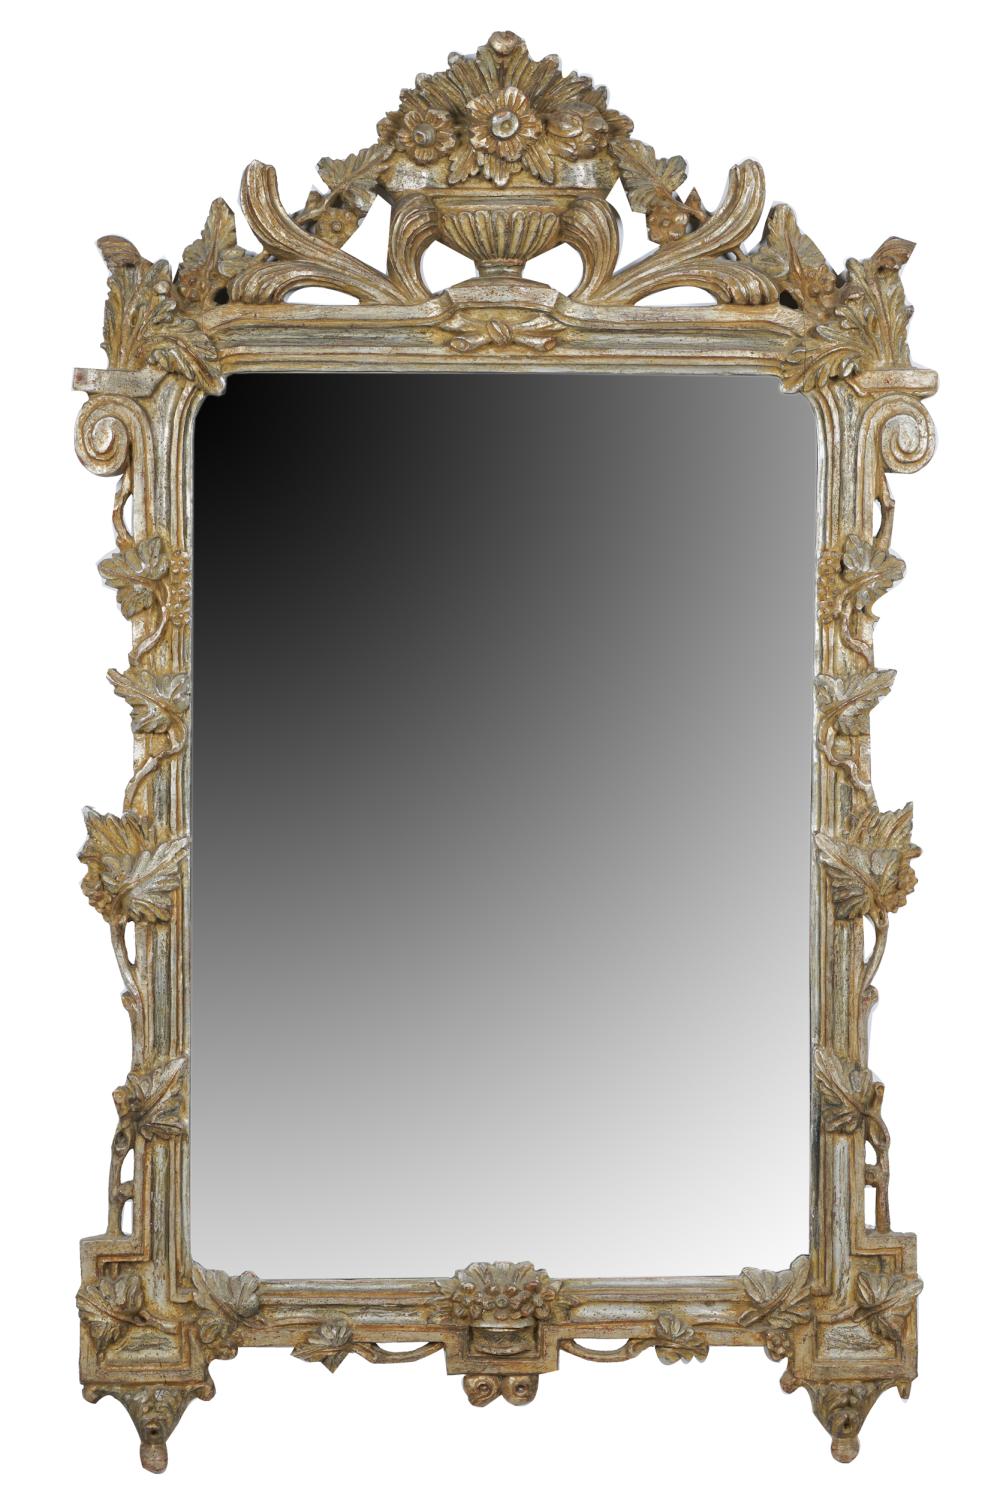 NEOCLASSIC-STYLE SILVER-PAINTED